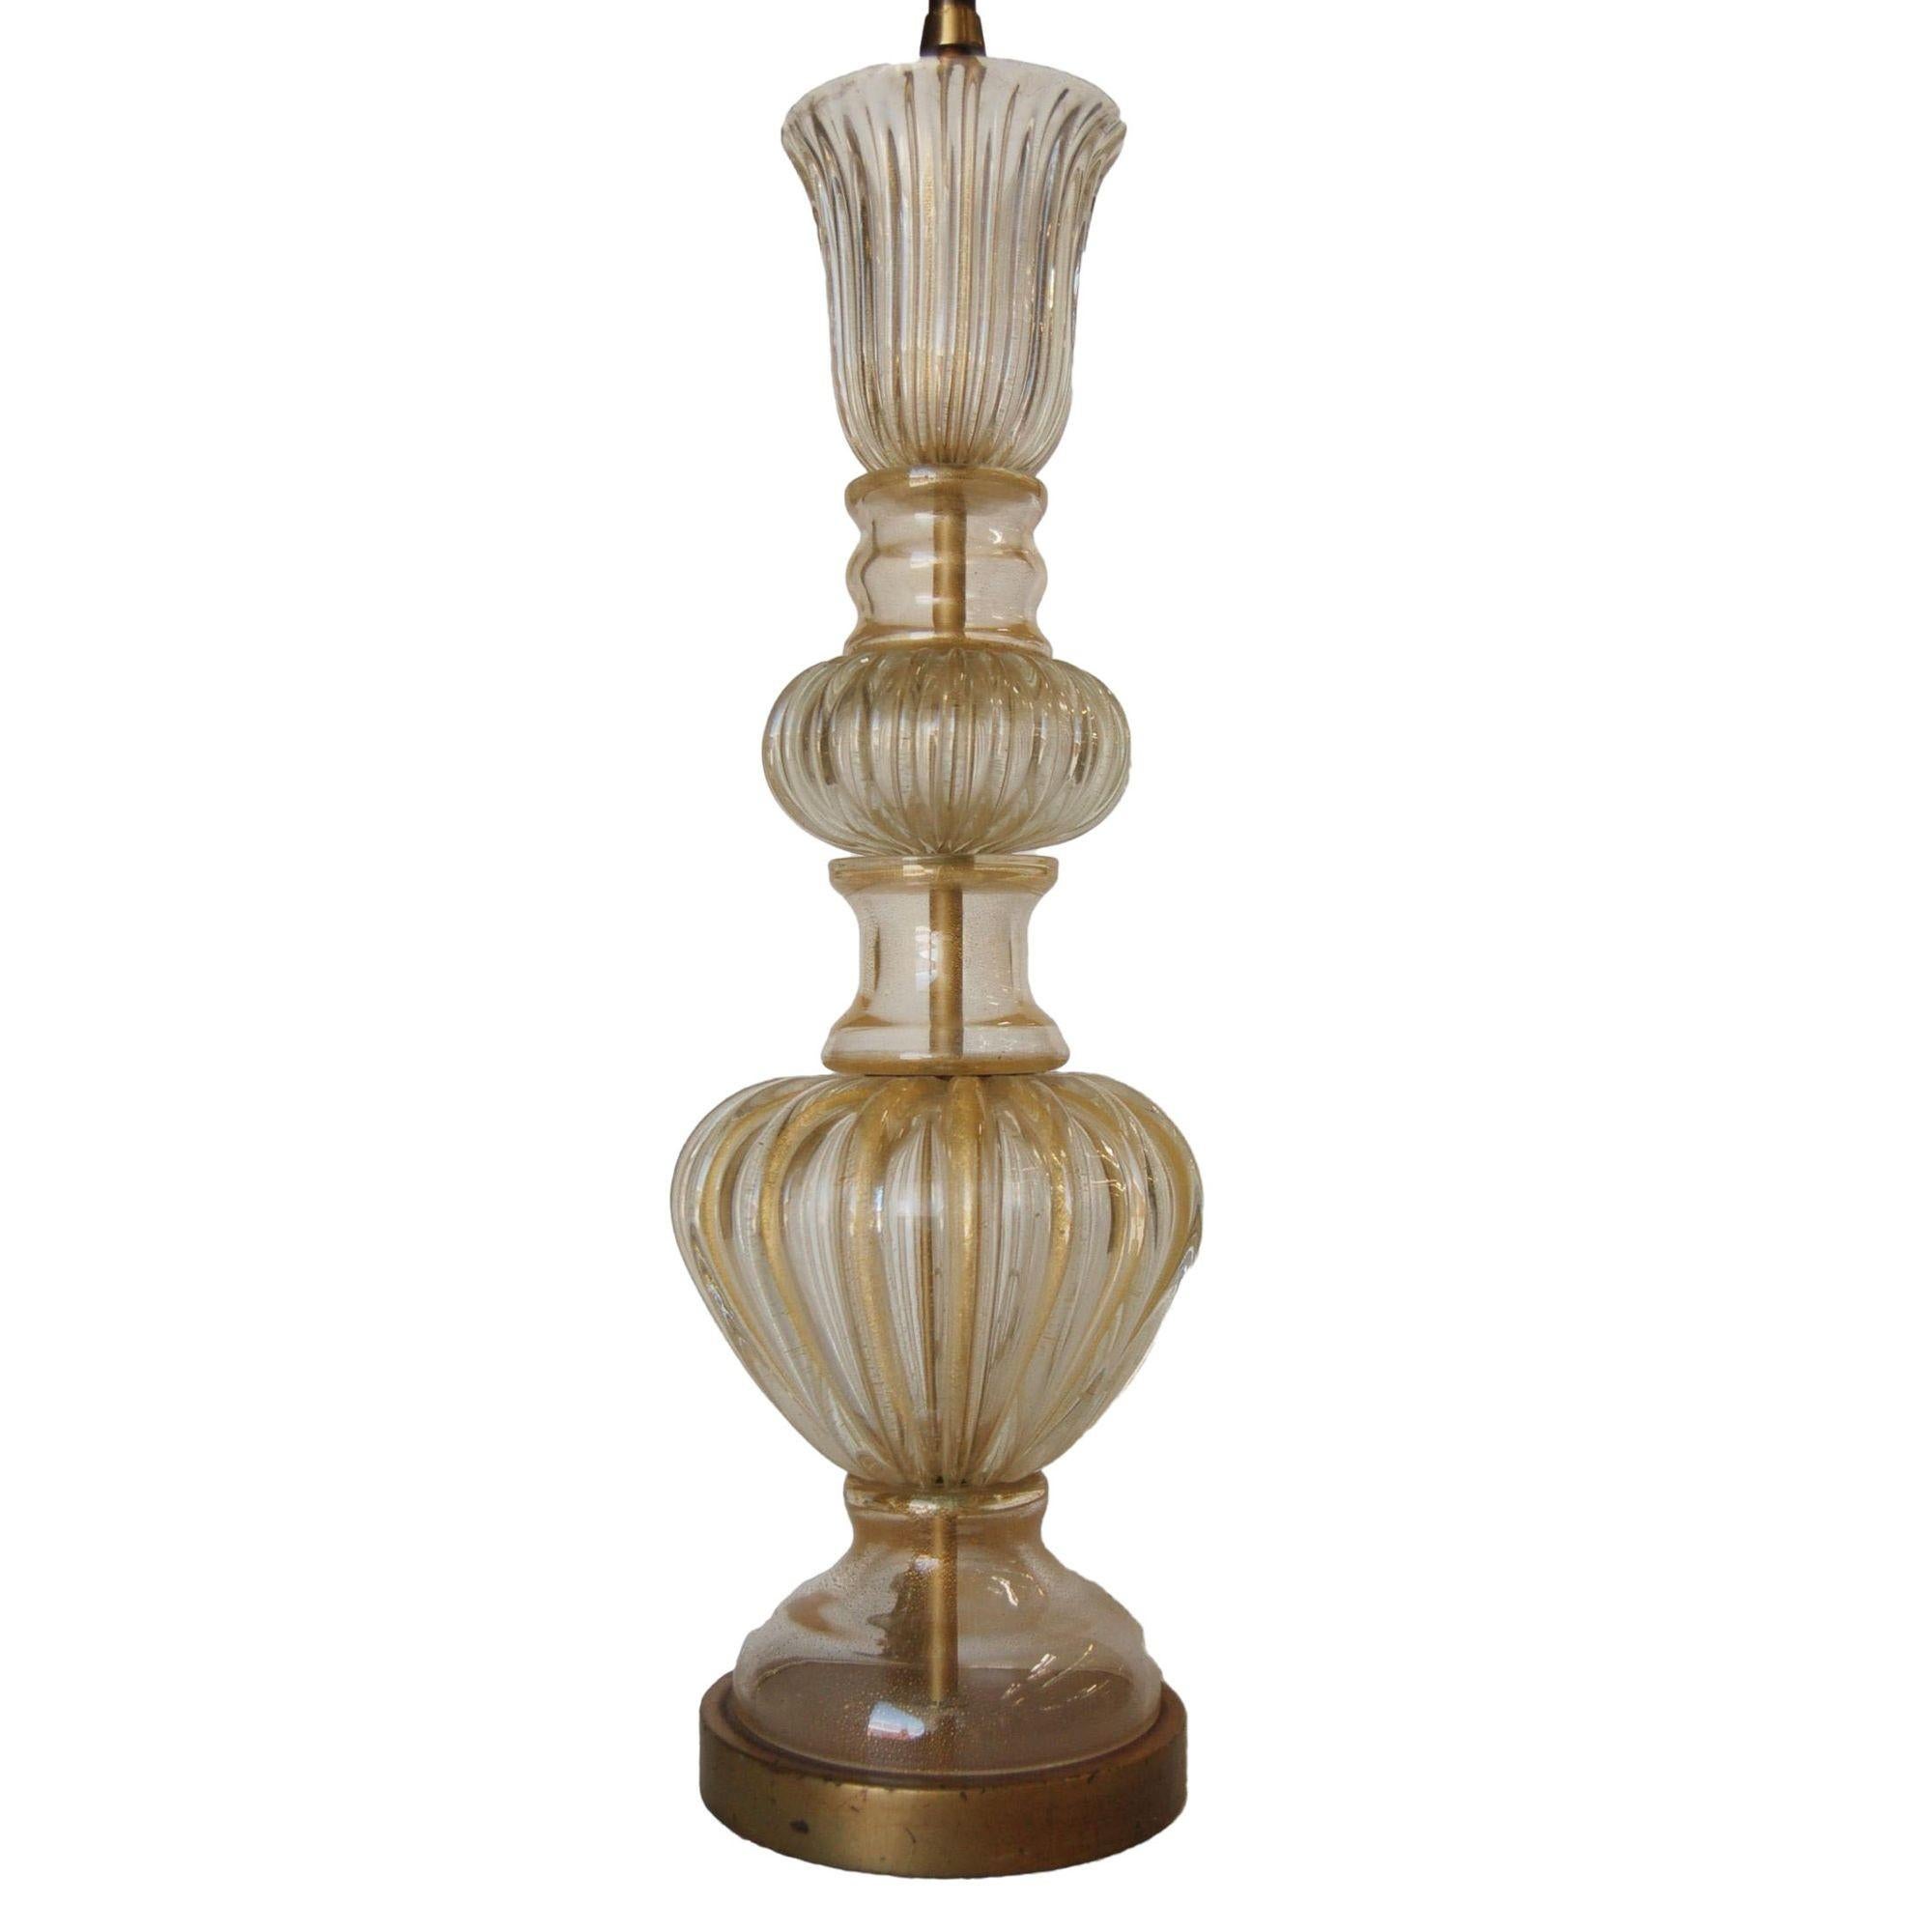 Large ornate gold hand blown Barovier style Murano glass table lamp takes two bulbs on pull Cain. Measure: 8